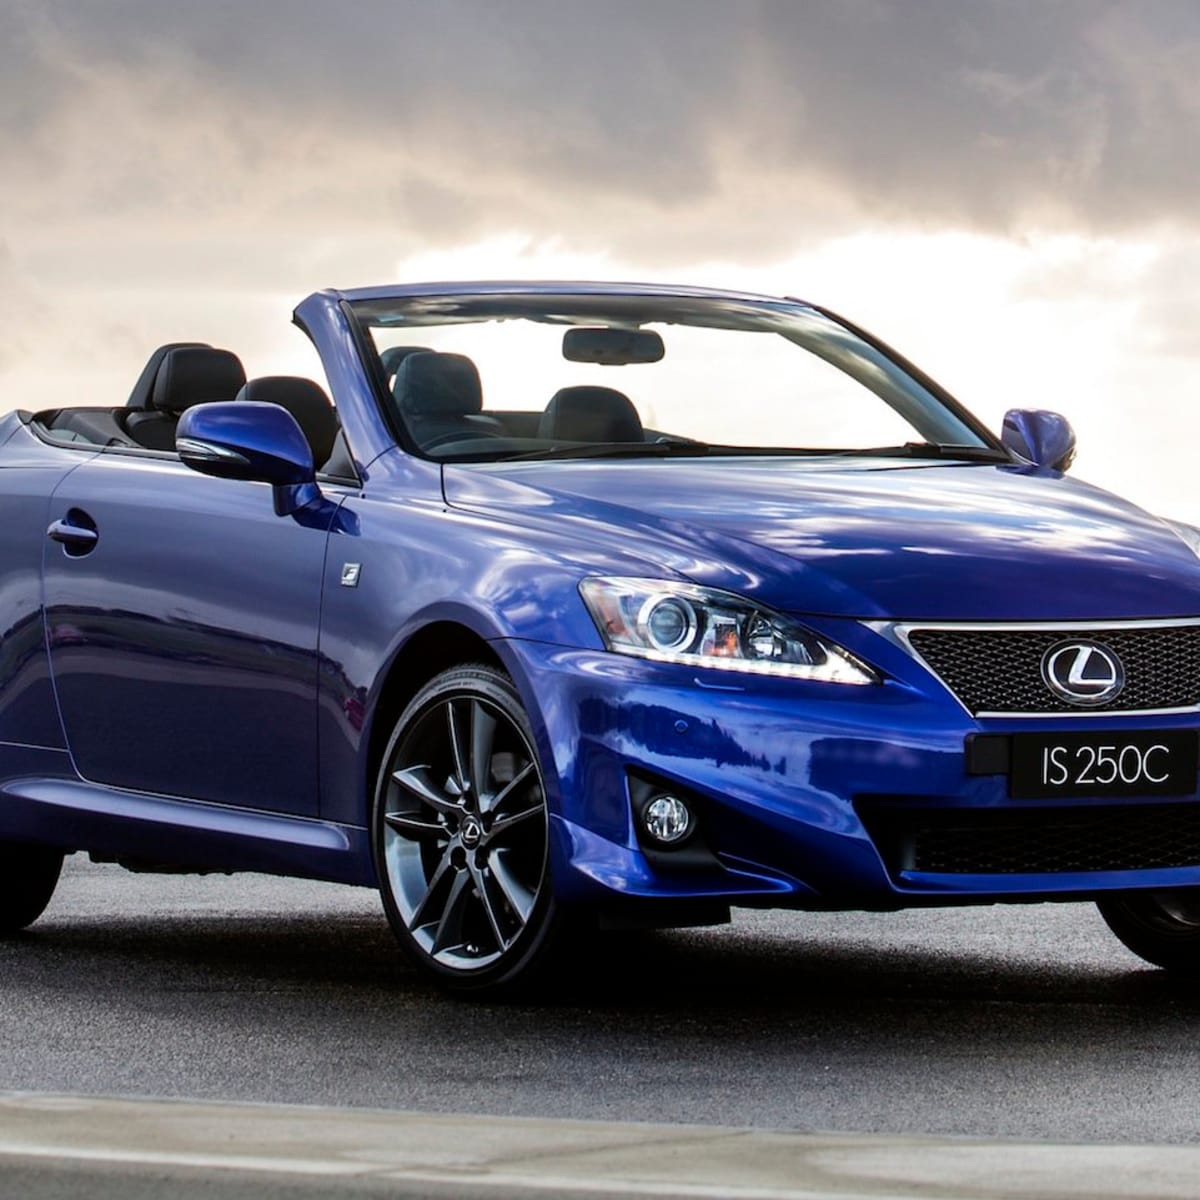 Lexus Is 250c F Sport Performance Model Topless For First Time Caradvice